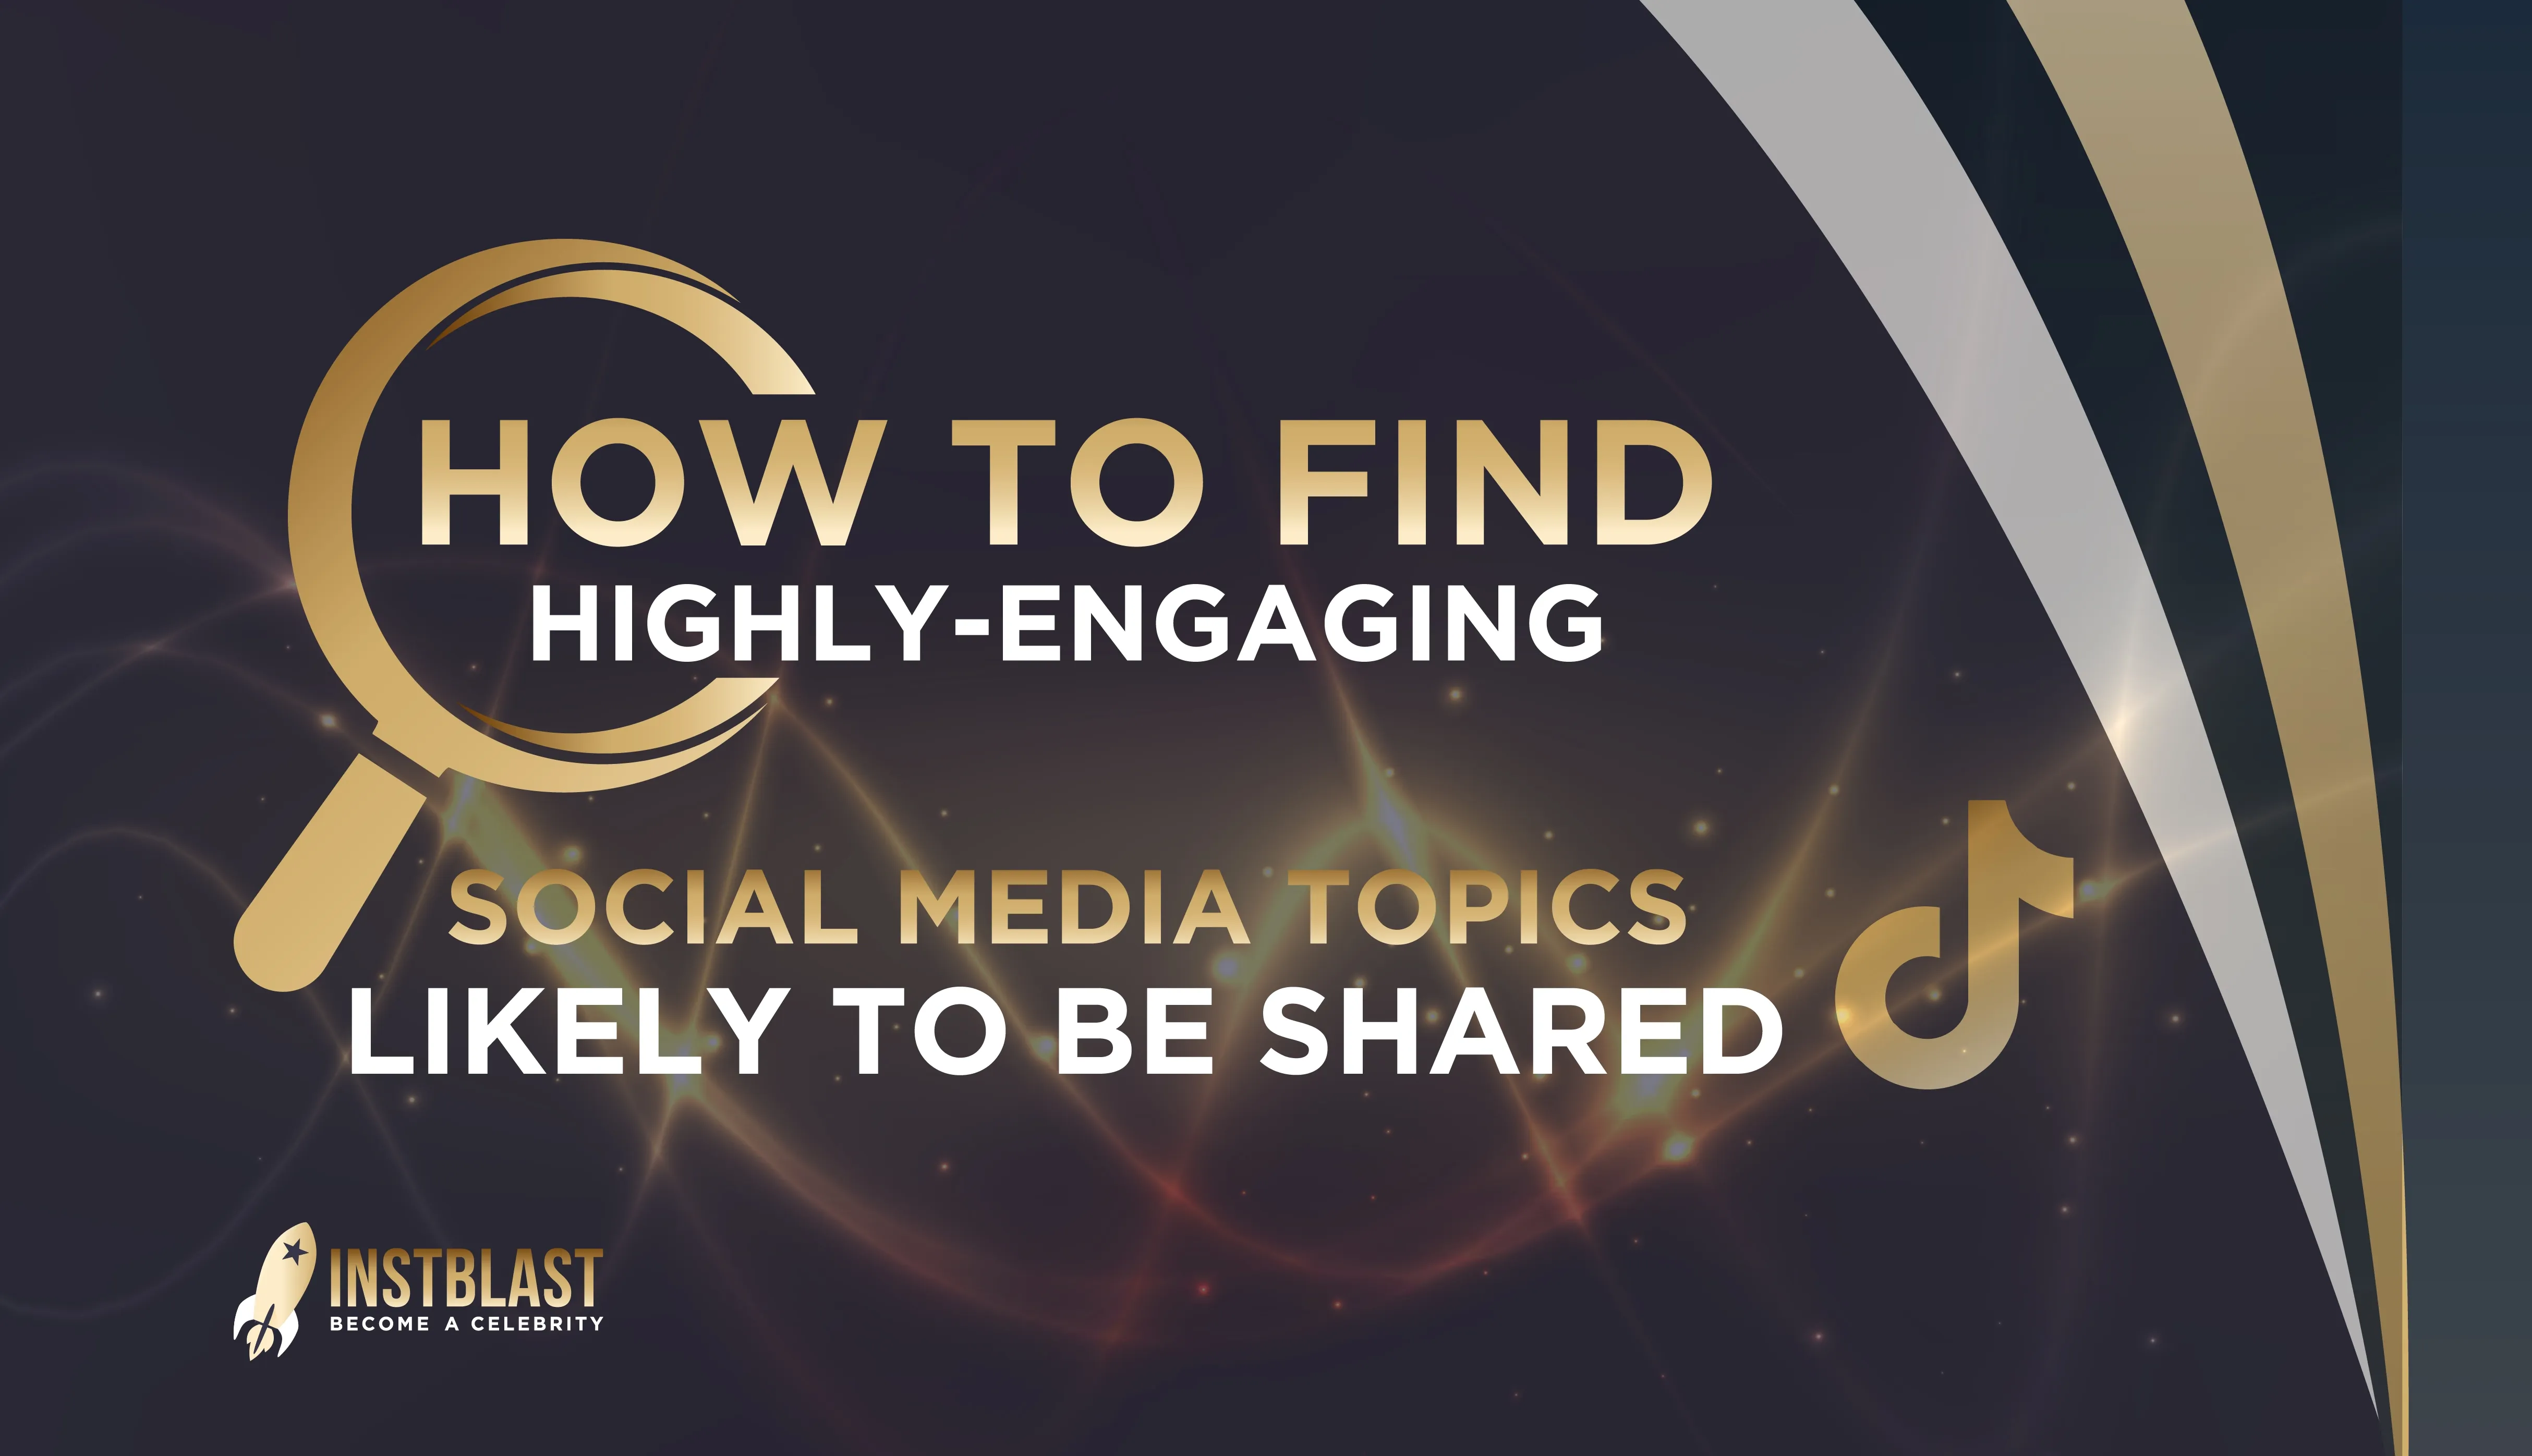 How to Find Highly-Engaging Social Media Topics 